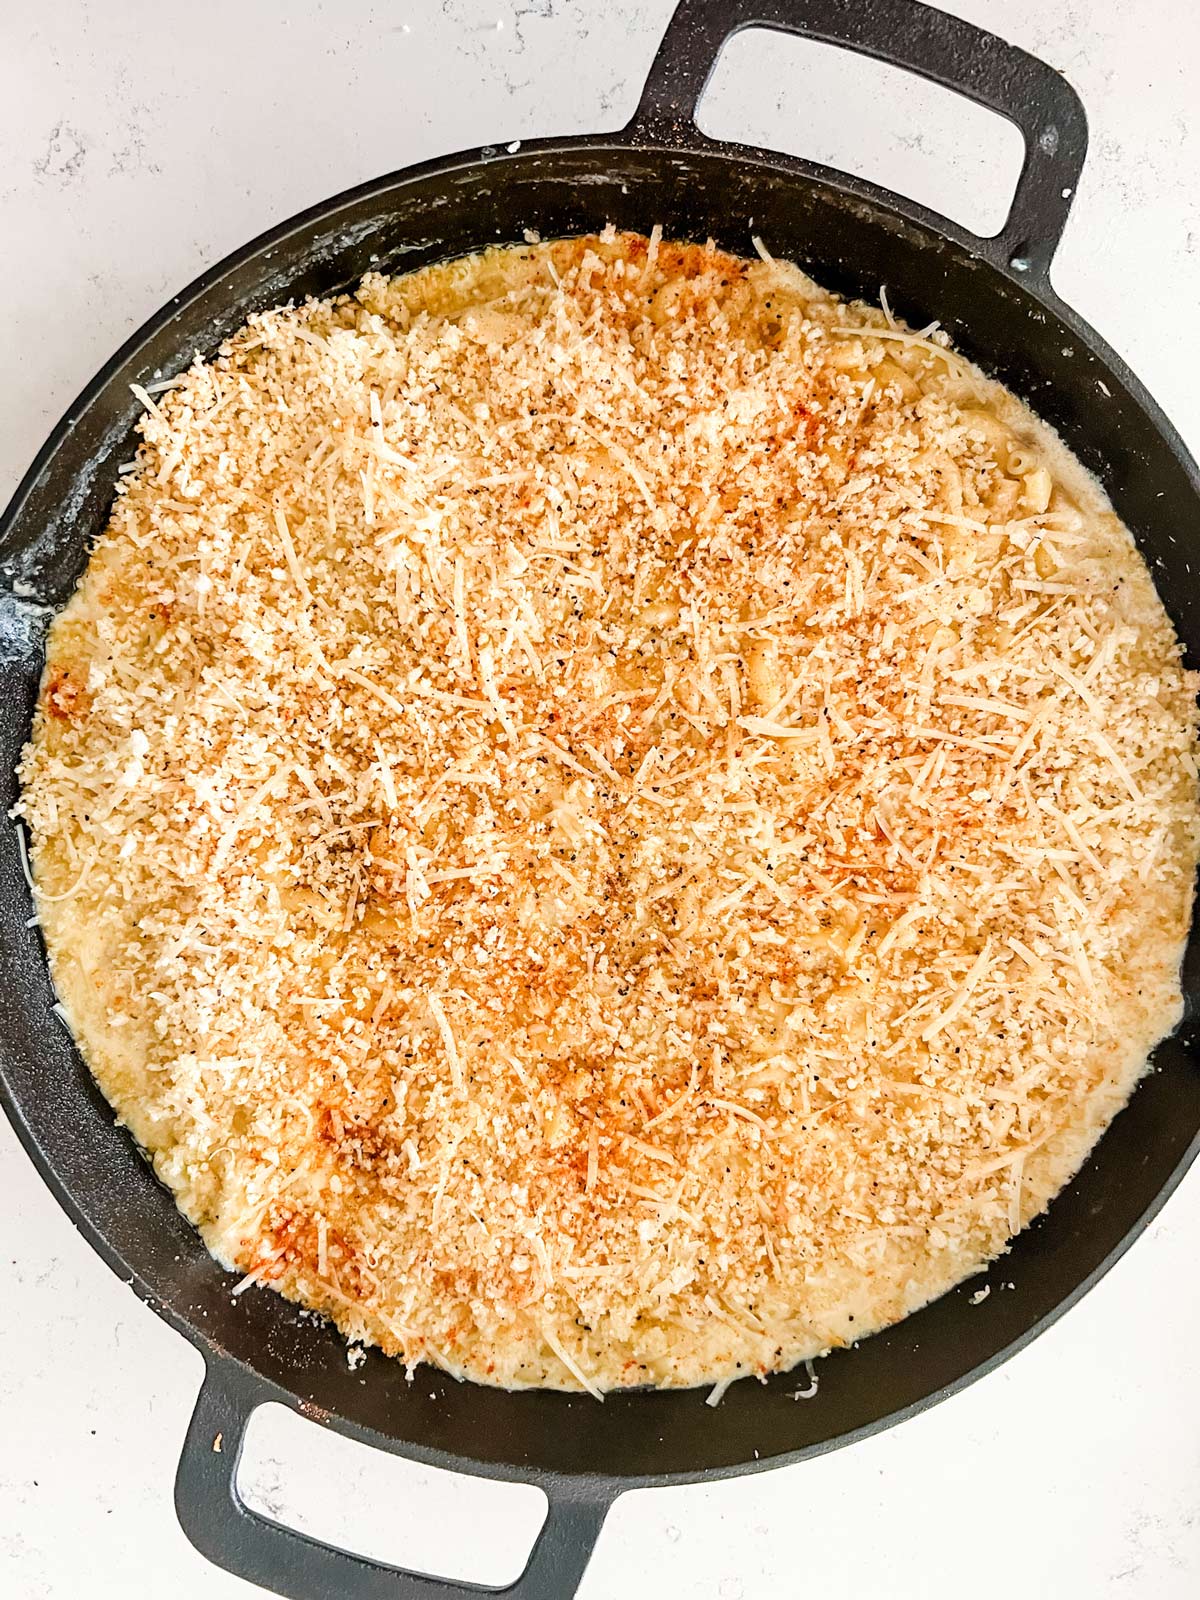 Mac and cheese in a cast iron skillet with a parmesan breadcrumb topping.